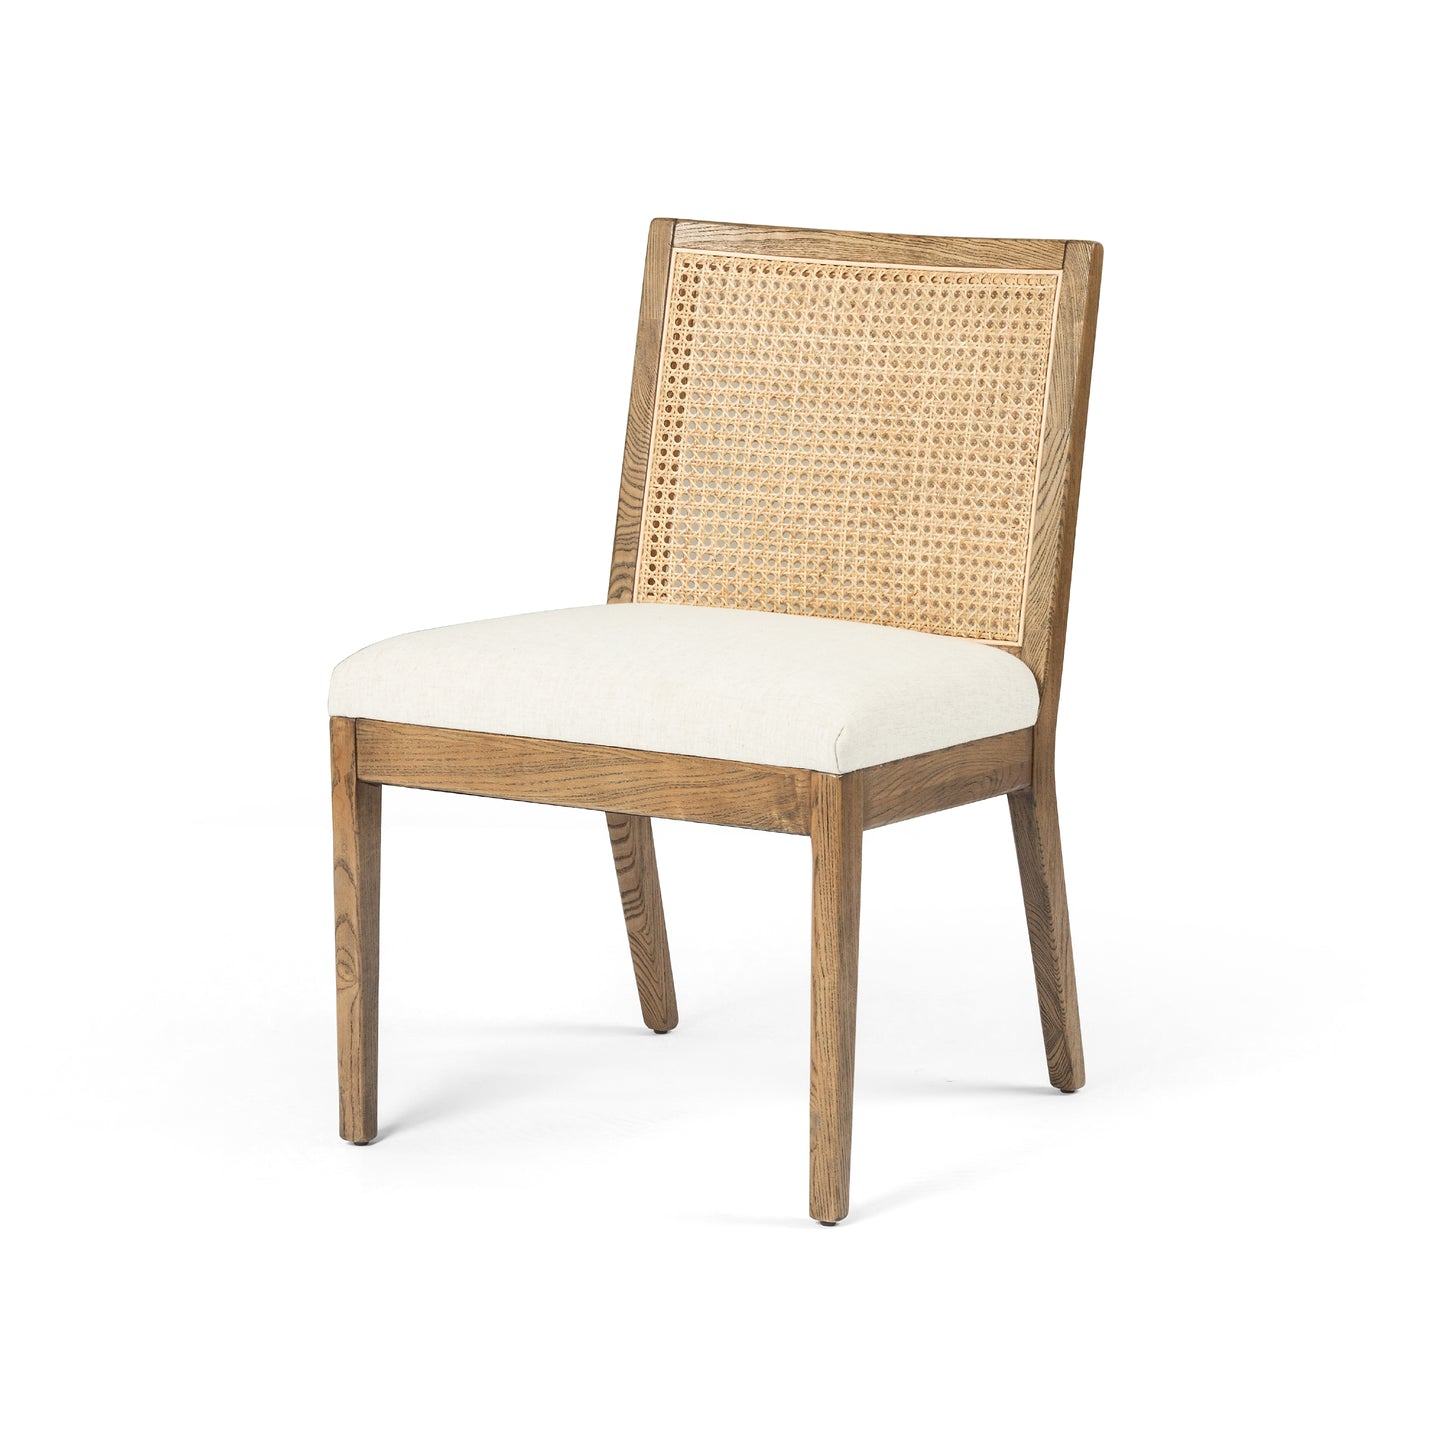 Load image into Gallery viewer, Antonia Cane Armless Dining Chair Toasted ParawoodDining Chair Four Hands  Toasted Parawood   Four Hands, Burke Decor, Mid Century Modern Furniture, Old Bones Furniture Company, Old Bones Co, Modern Mid Century, Designer Furniture, https://www.oldbonesco.com/
